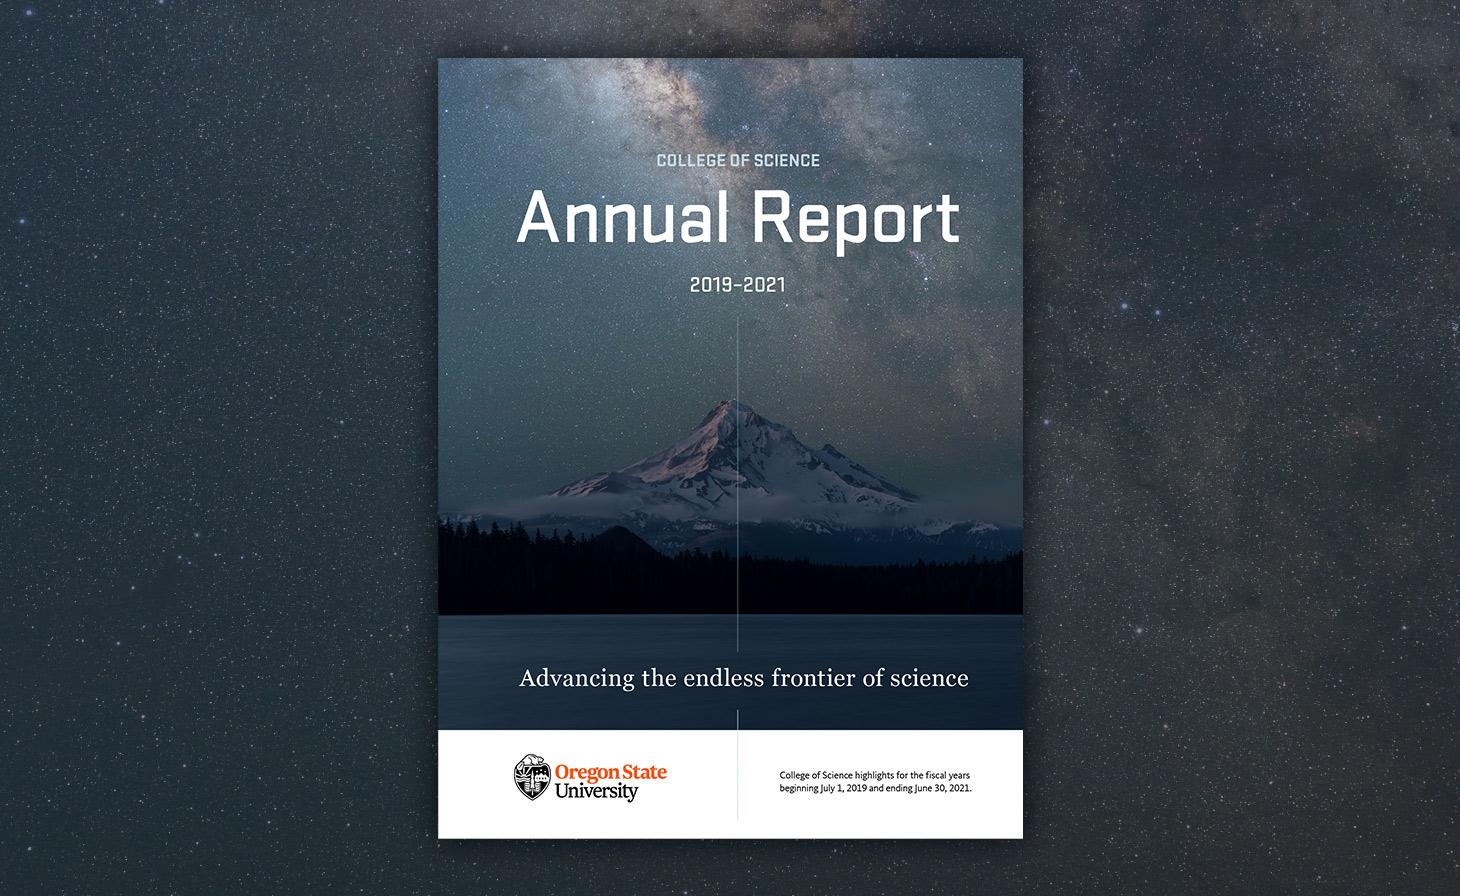 Cover of the 2019-21 Annual Report overlaid on a starry night sky. Text on the cover includes: College of Science Annual Report: Advancing the endless frontiers of Science